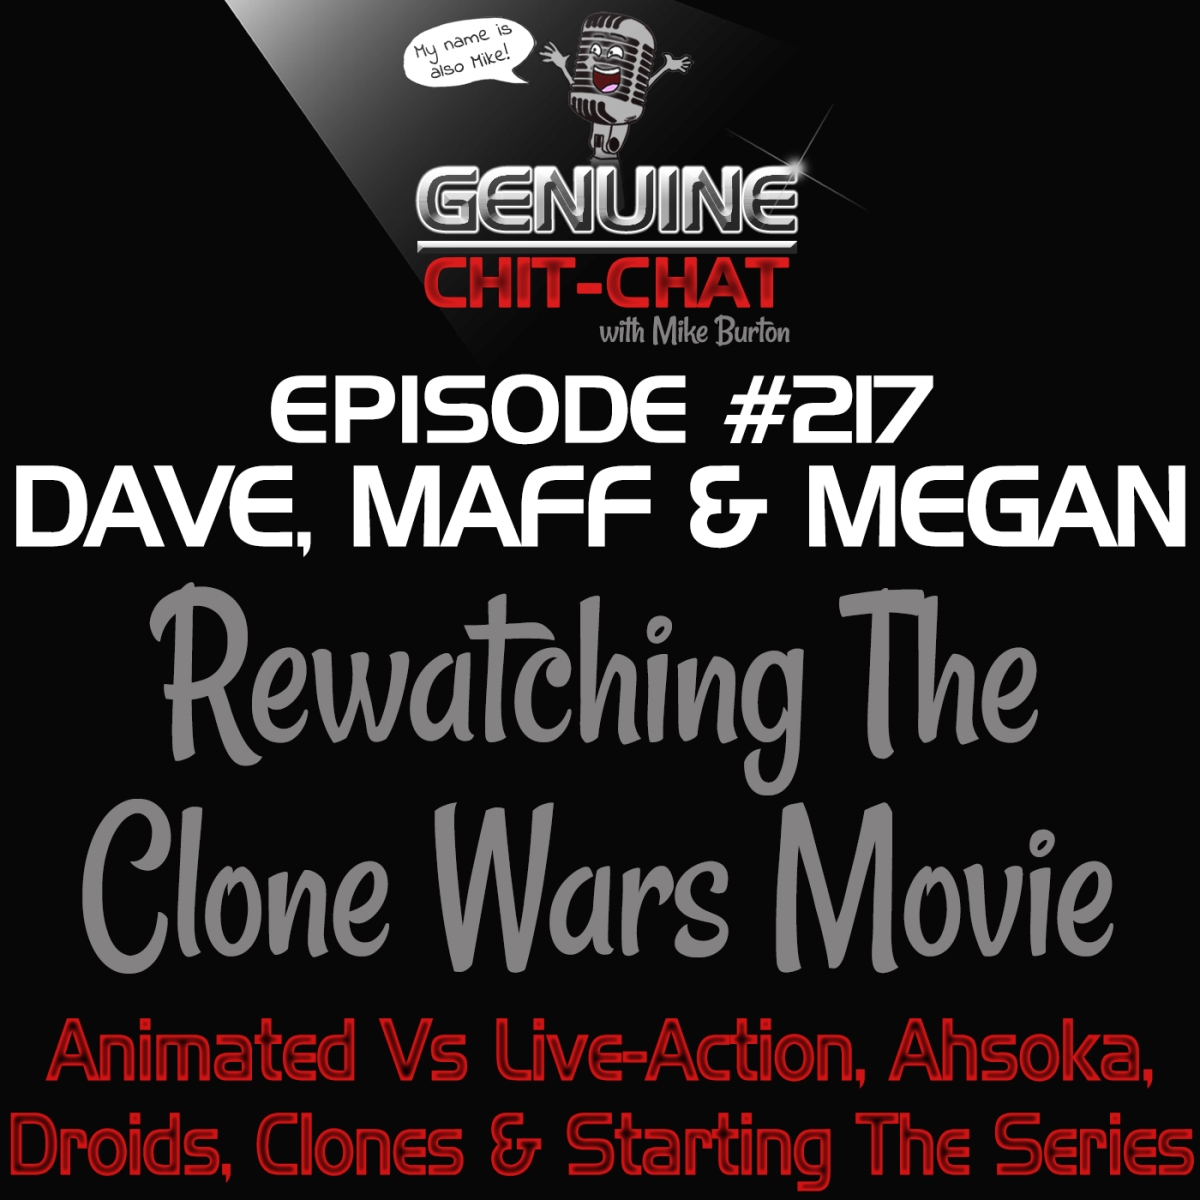 #217 – Rewatching The Clone Wars Movie: Animated Vs Live-Action, Ahsoka, Droids, Clones & Starting The Series With Dave, Maff & Megan